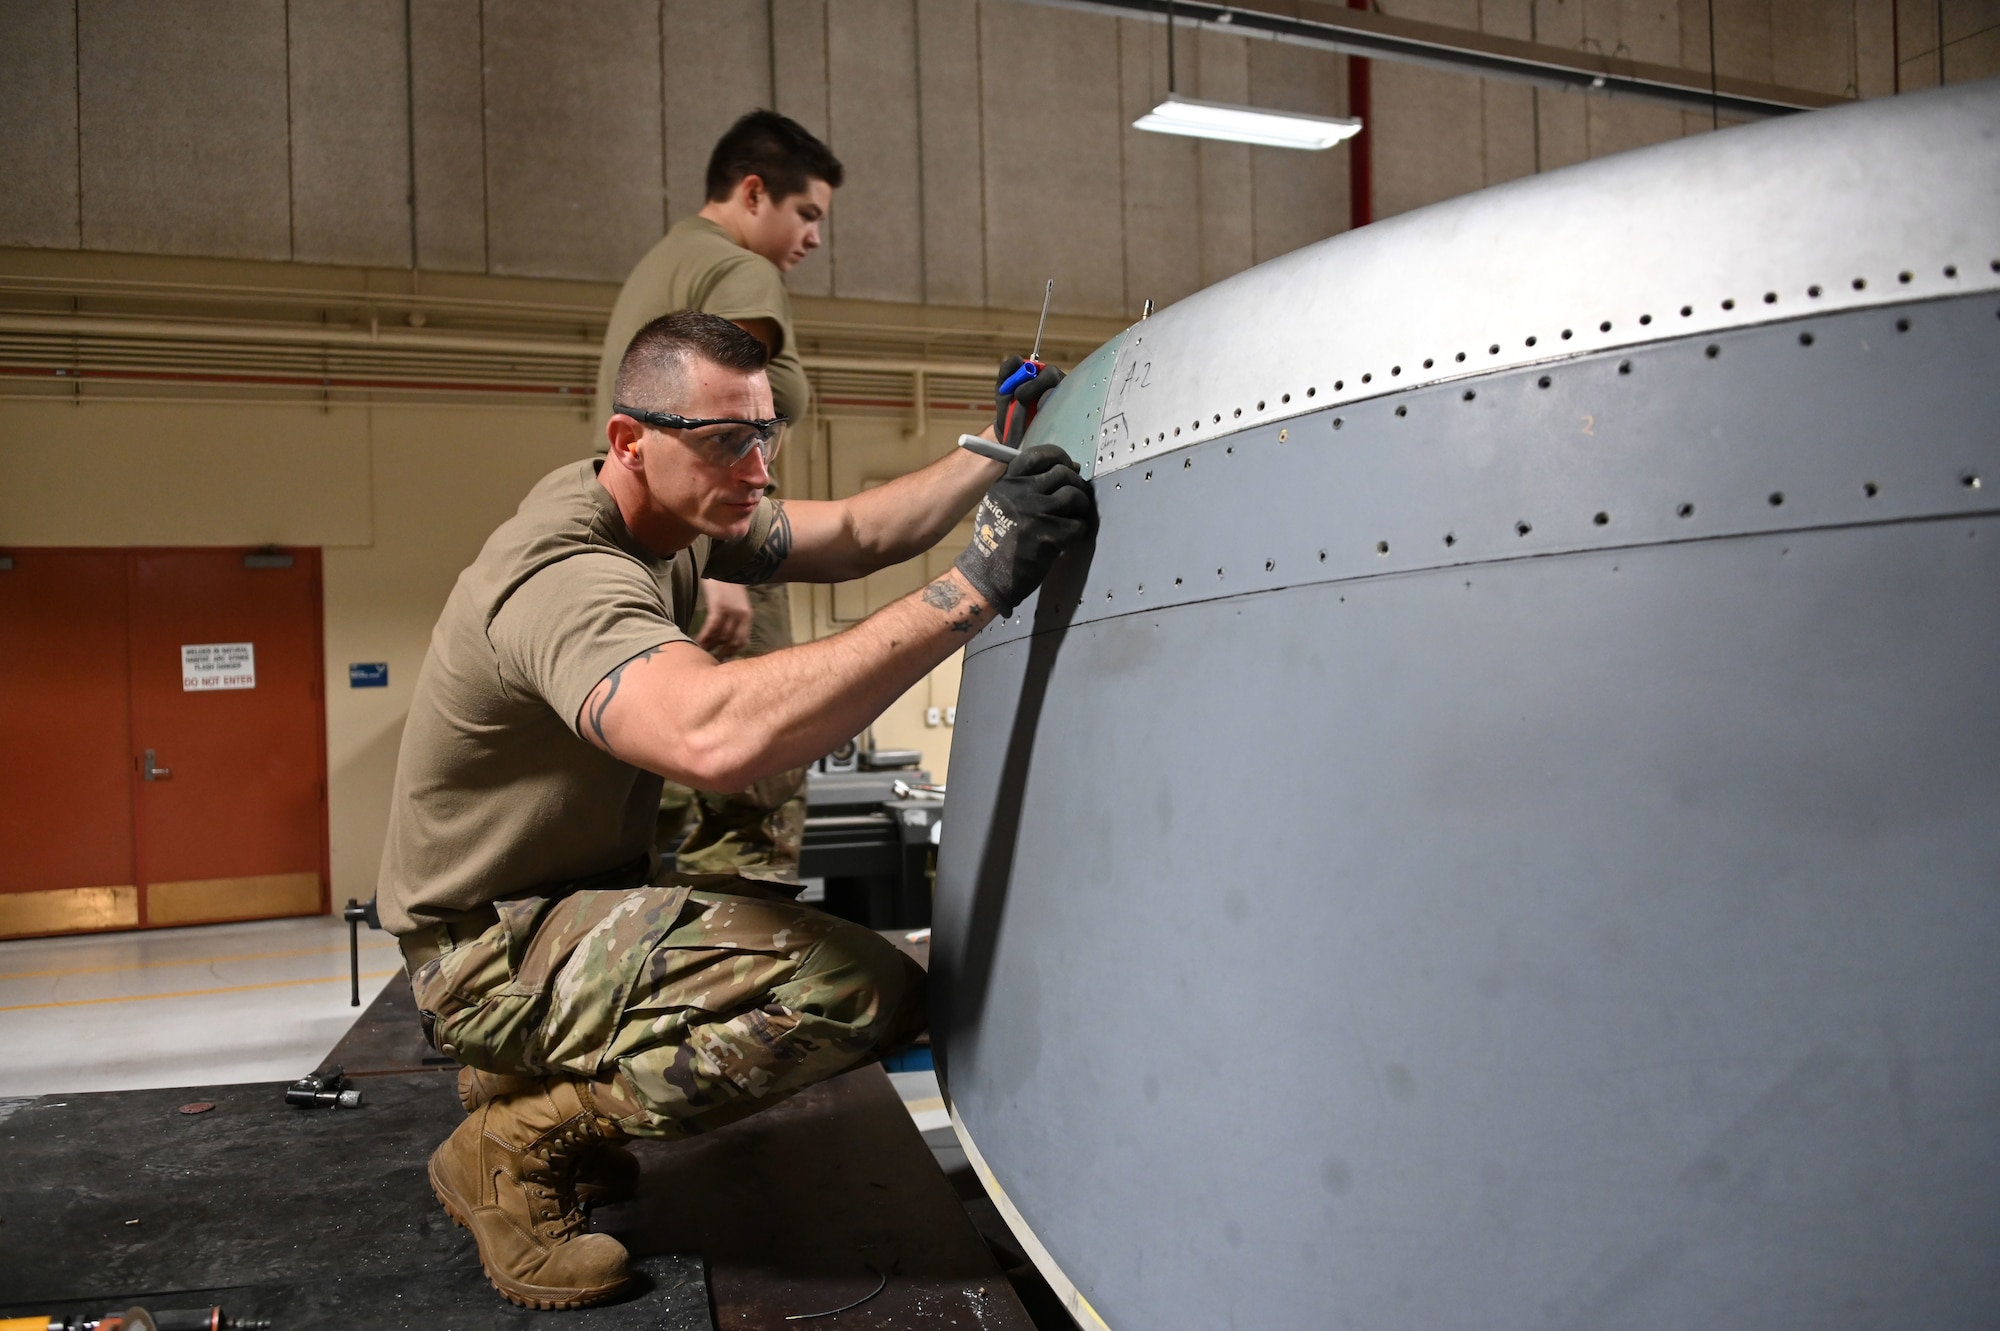 Senior Master Sgt. James Jenkins, aircraft structural technician with the 507th Maintenance Squadron, marks areas to be trimmed from a new engine intake section fabricated in the 507th Maintenance Squadron structures shop October 2, 2020, at Tinker Air Force Base, Oklahoma. The structures shop fabricated a part in-house following a bird strike, saving the Air Force more than $1 million. (U.S. Air Force photo by Master Sgt. Grady Epperly)